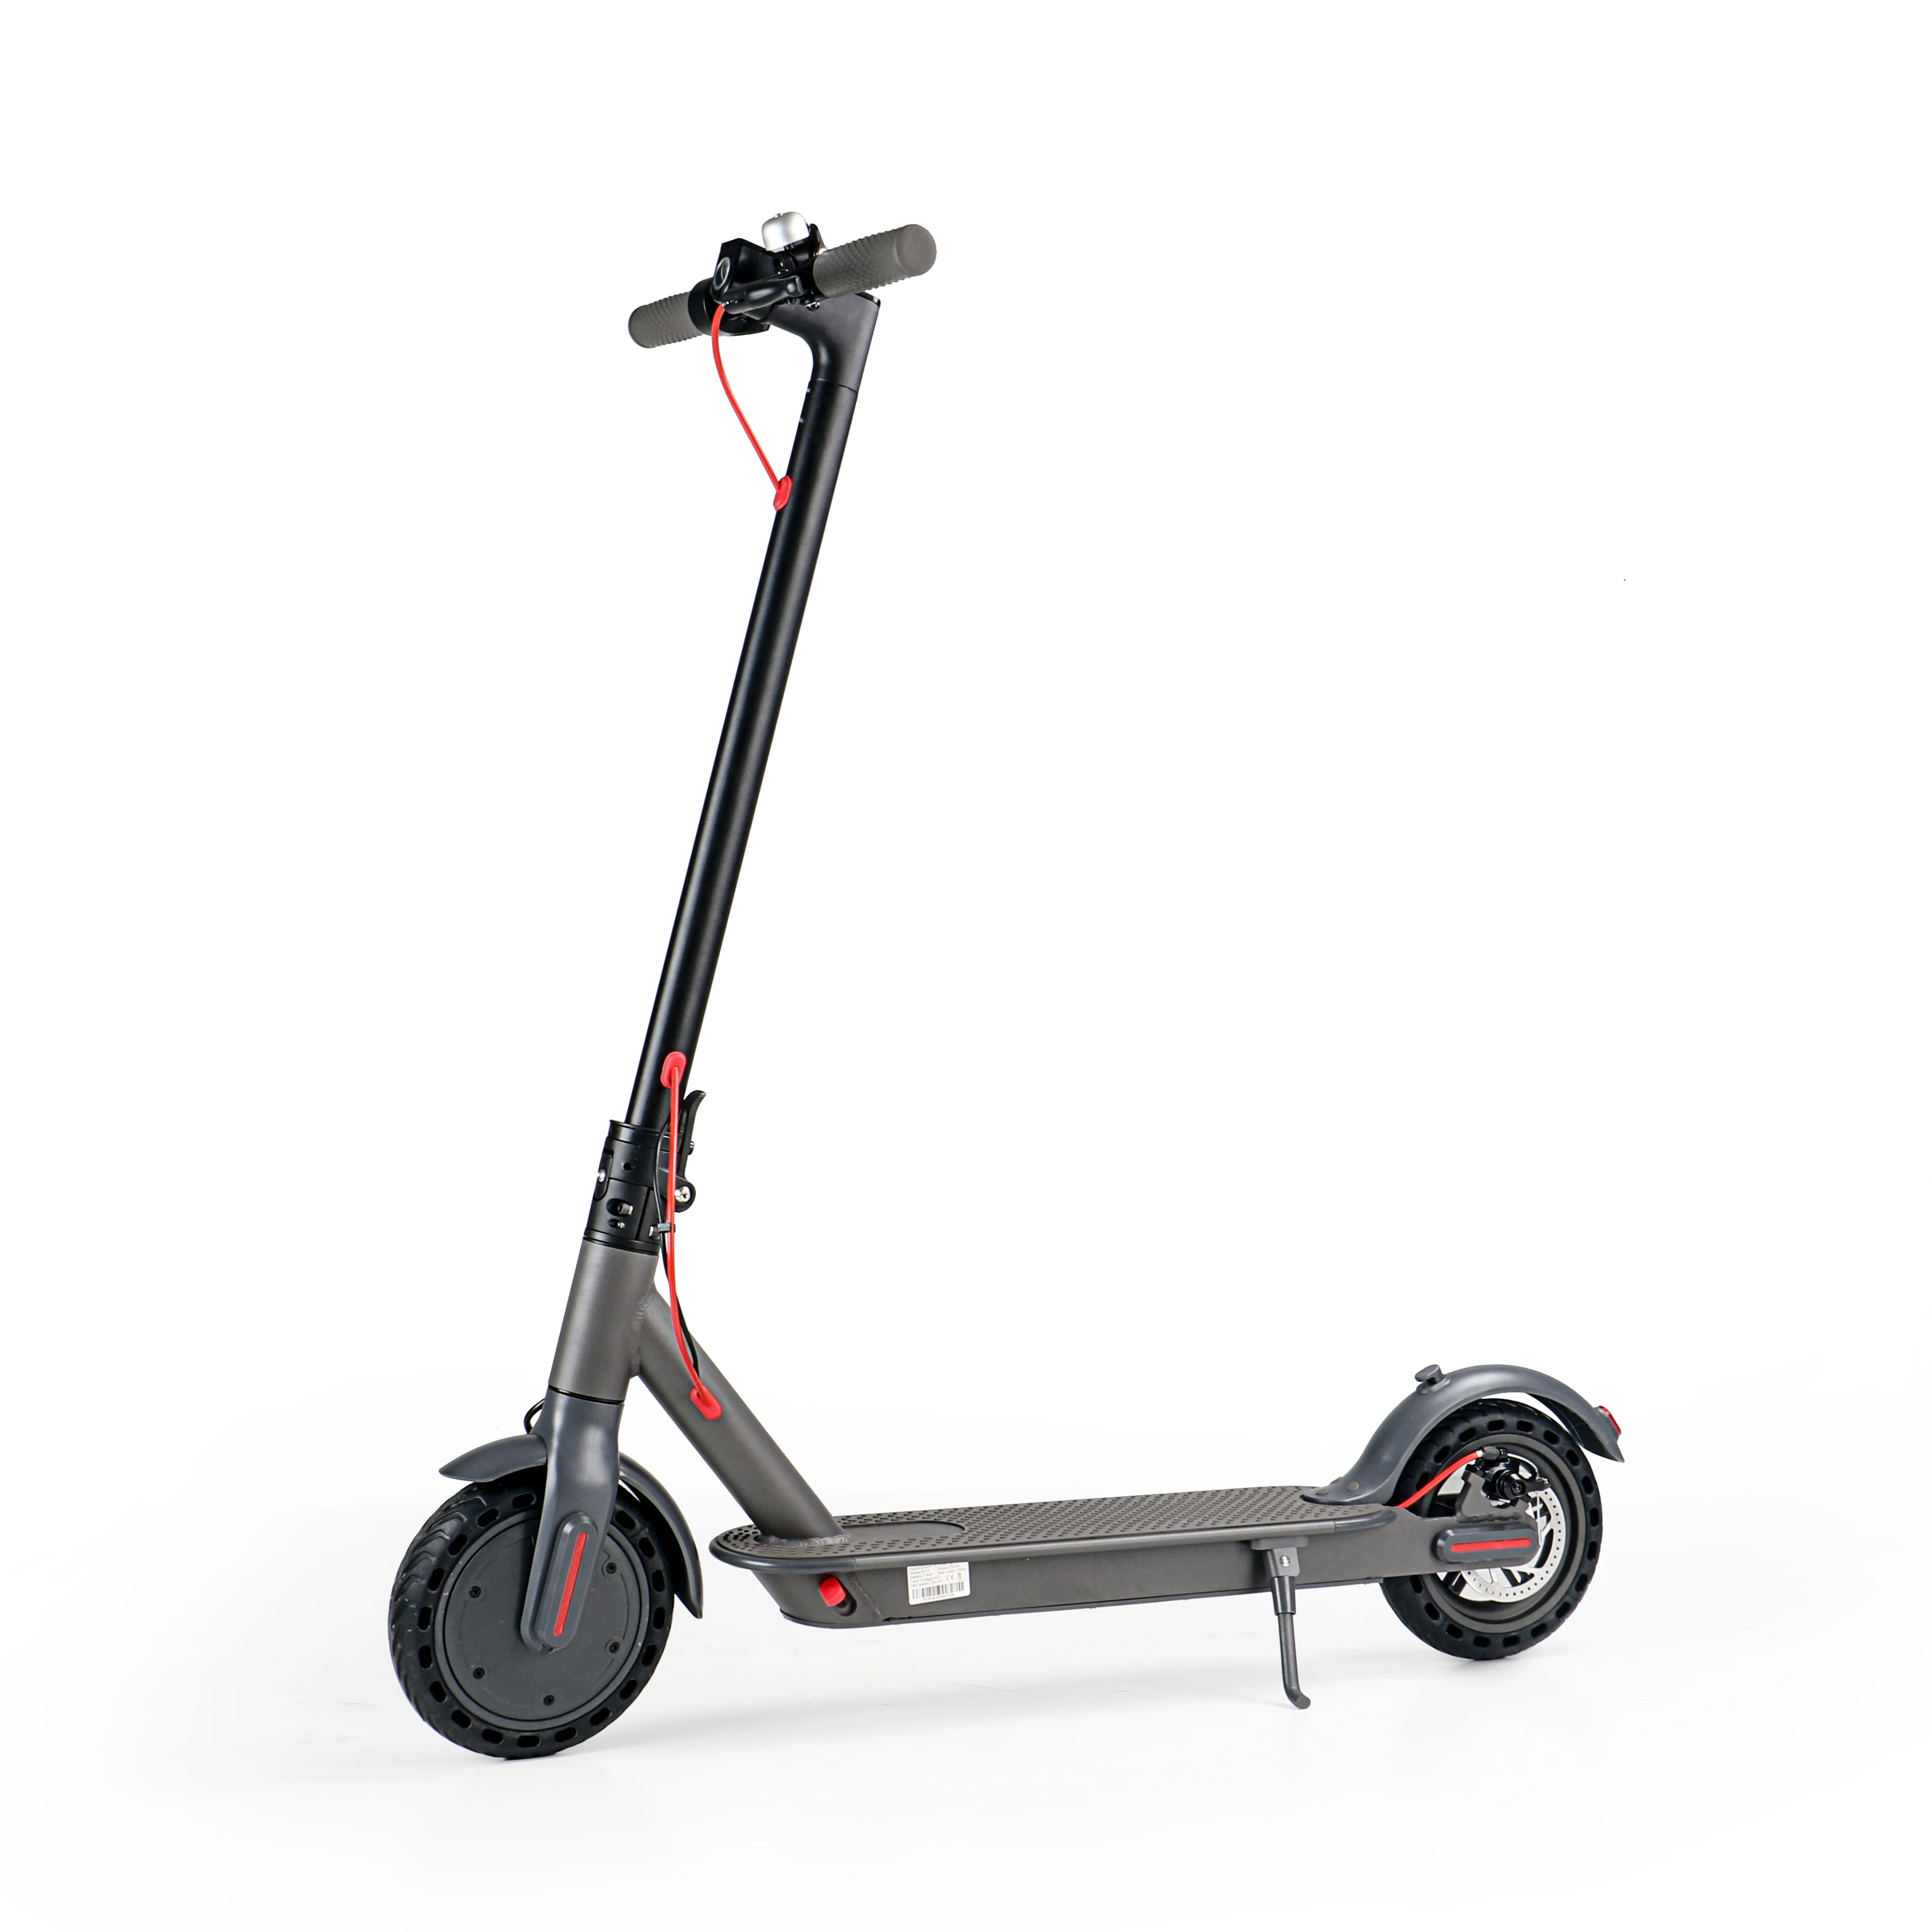 

2022 New UK Germany 8.5inch 10.5Ah Big Battery 25KM to 30KM Folding Waterproof Two Wheel Adult Electric Scooter